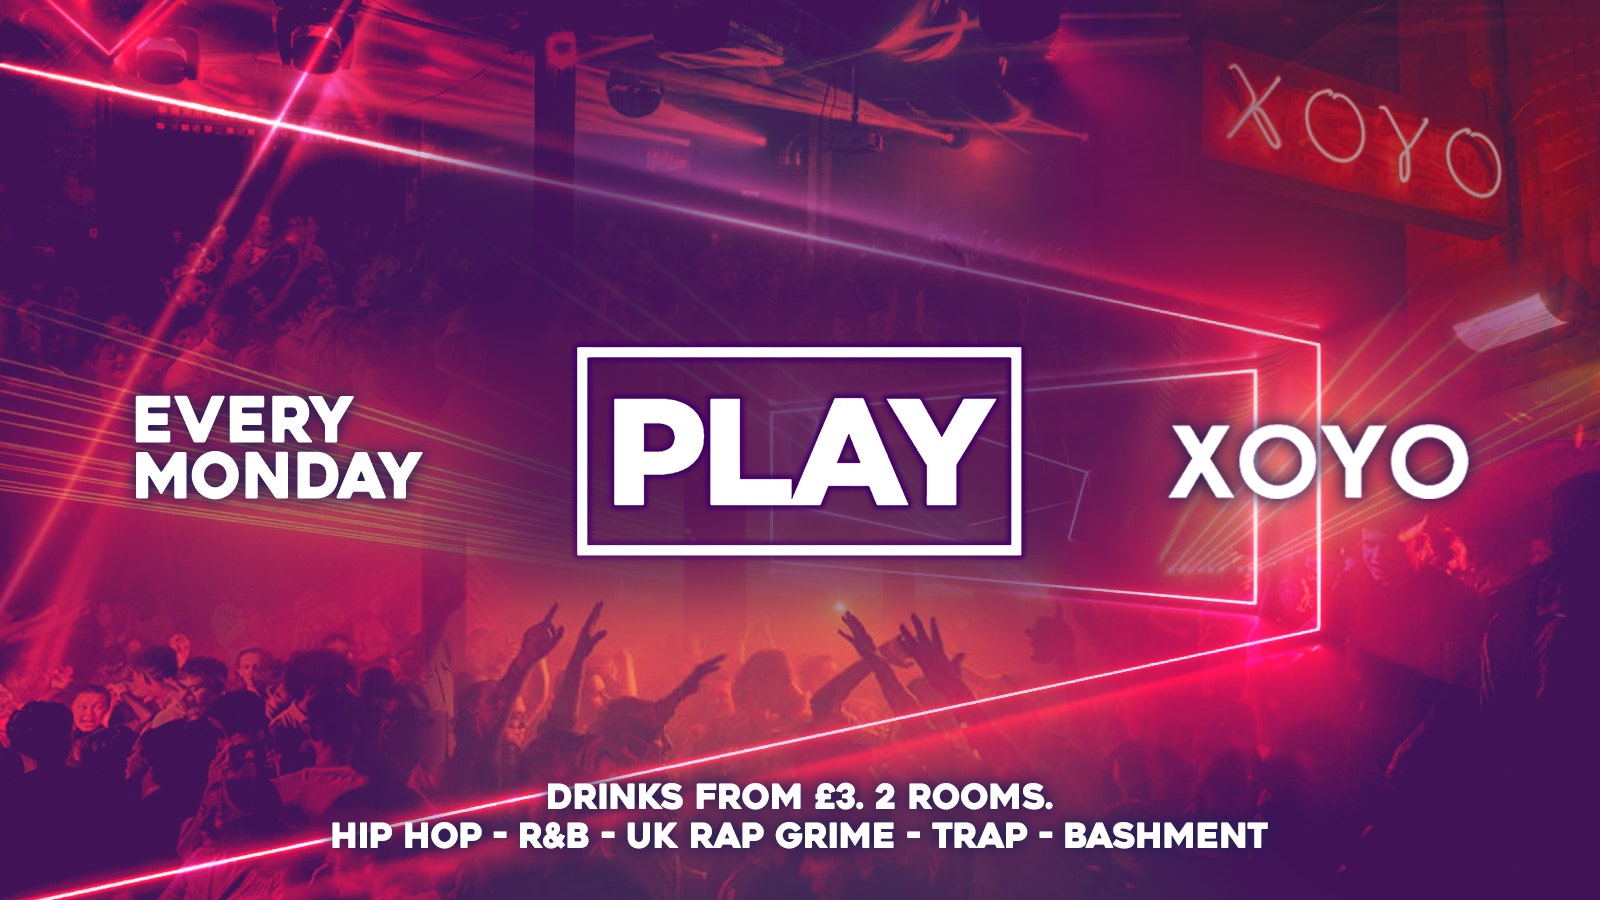 Play @ XOYO – The Biggest Weekly Monday Student Night in London!